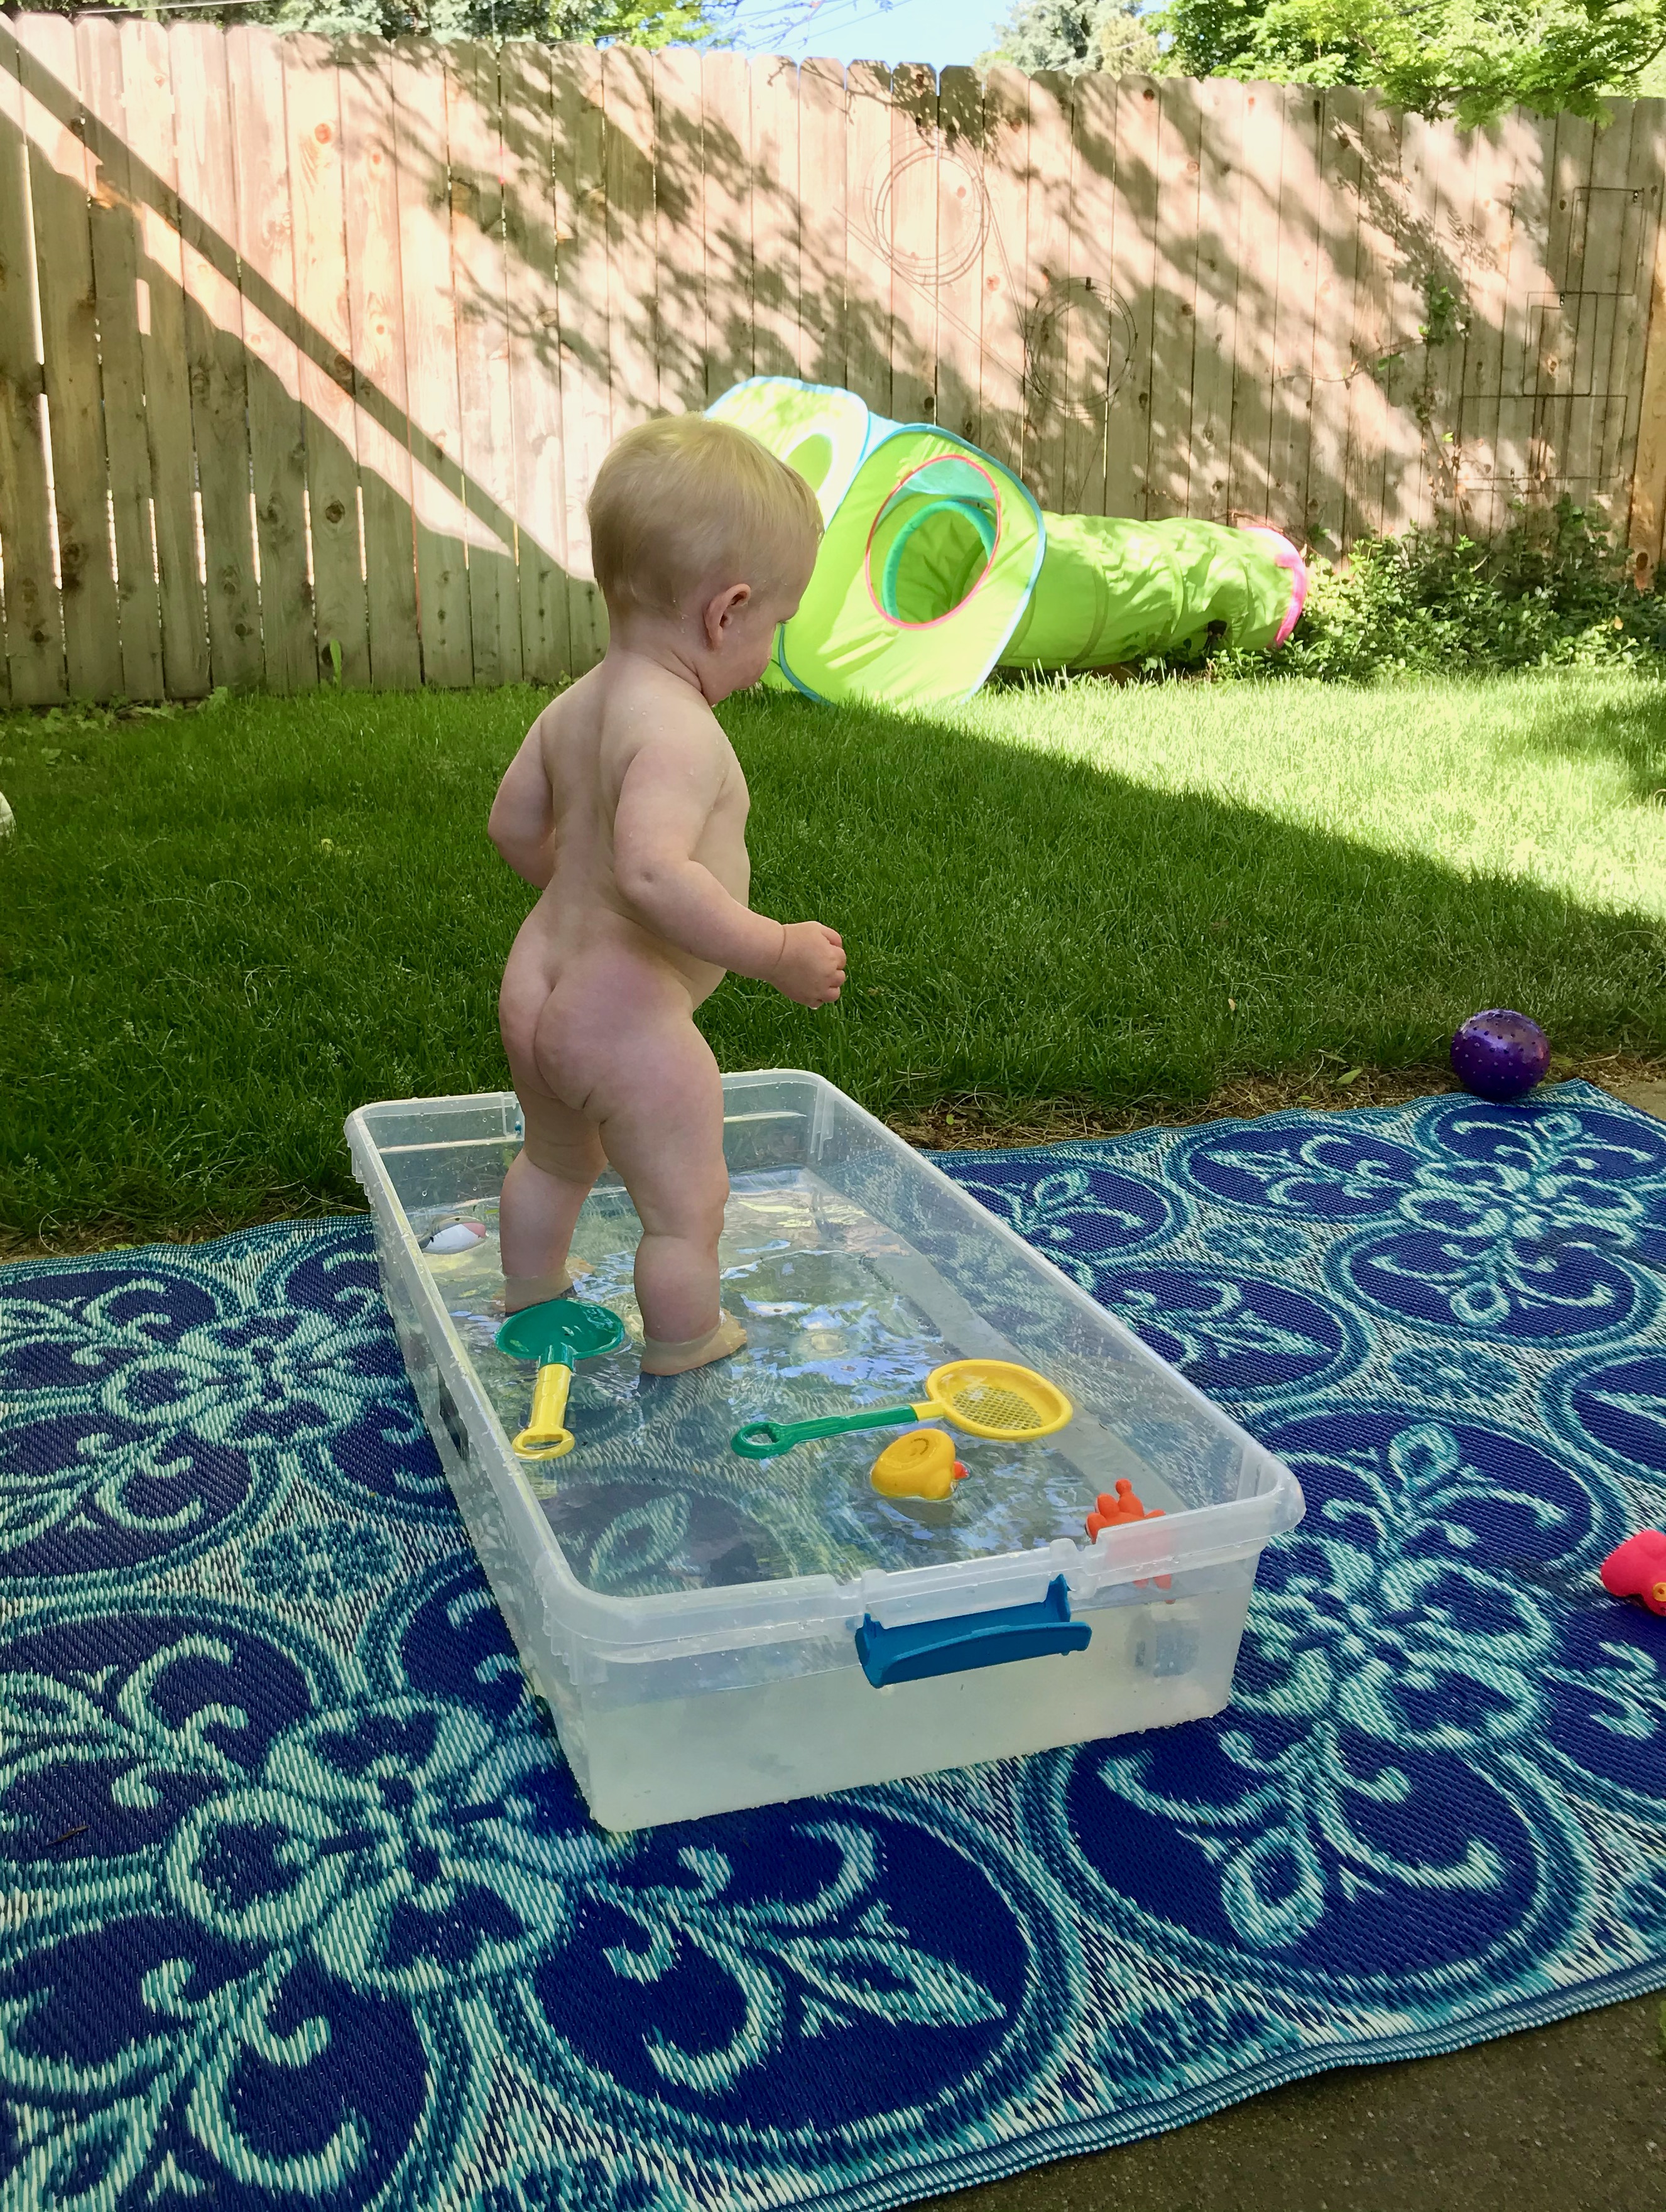 Owen playing with a makeshift wading pool in the back yard.